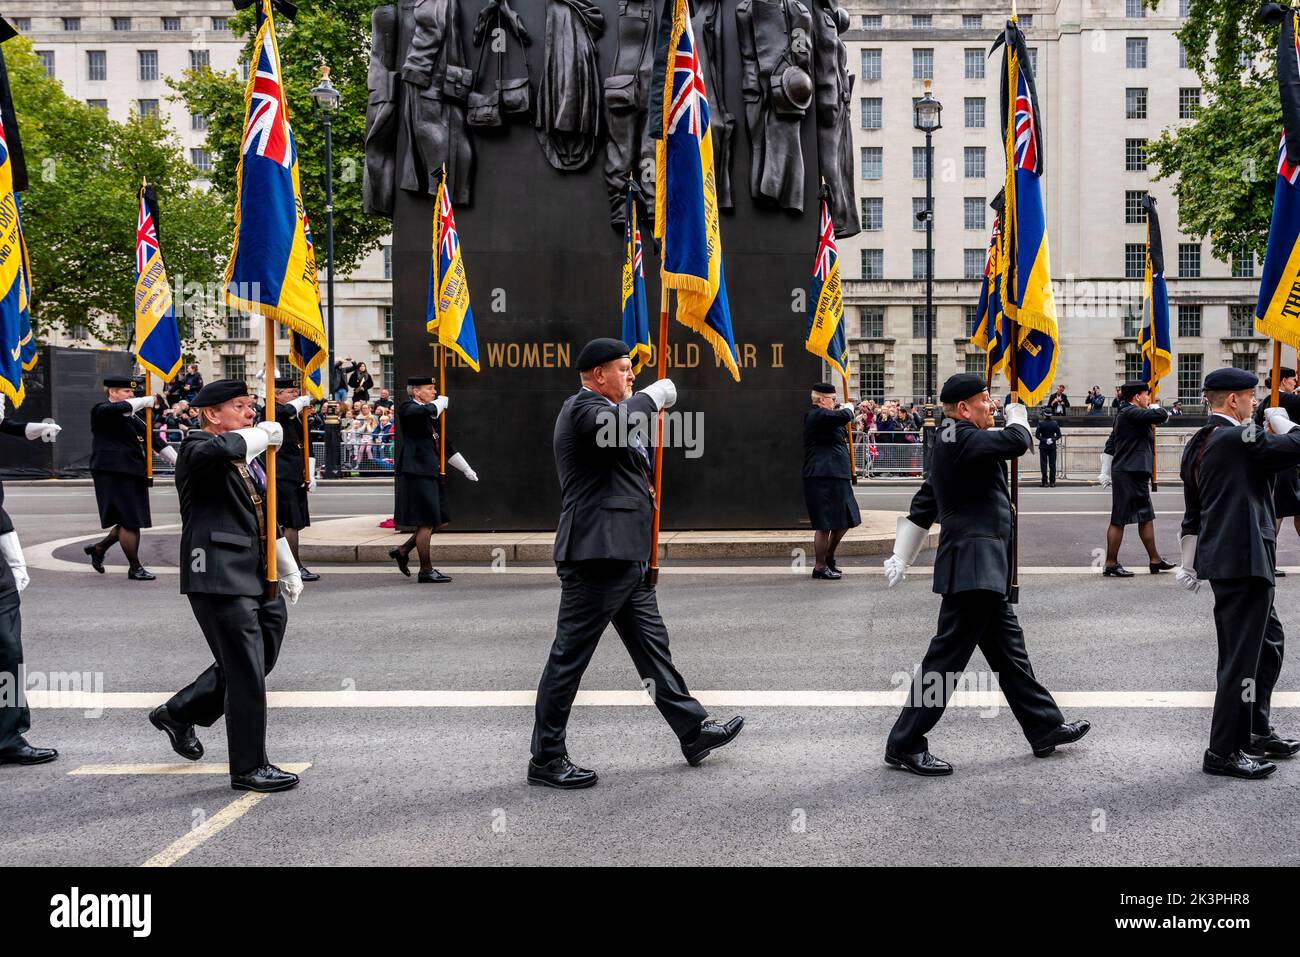 The Royal British Legion March Down Whitehall To Take Part In The Queen Elizabeth II Funeral Procession, London, UK. Stock Photo